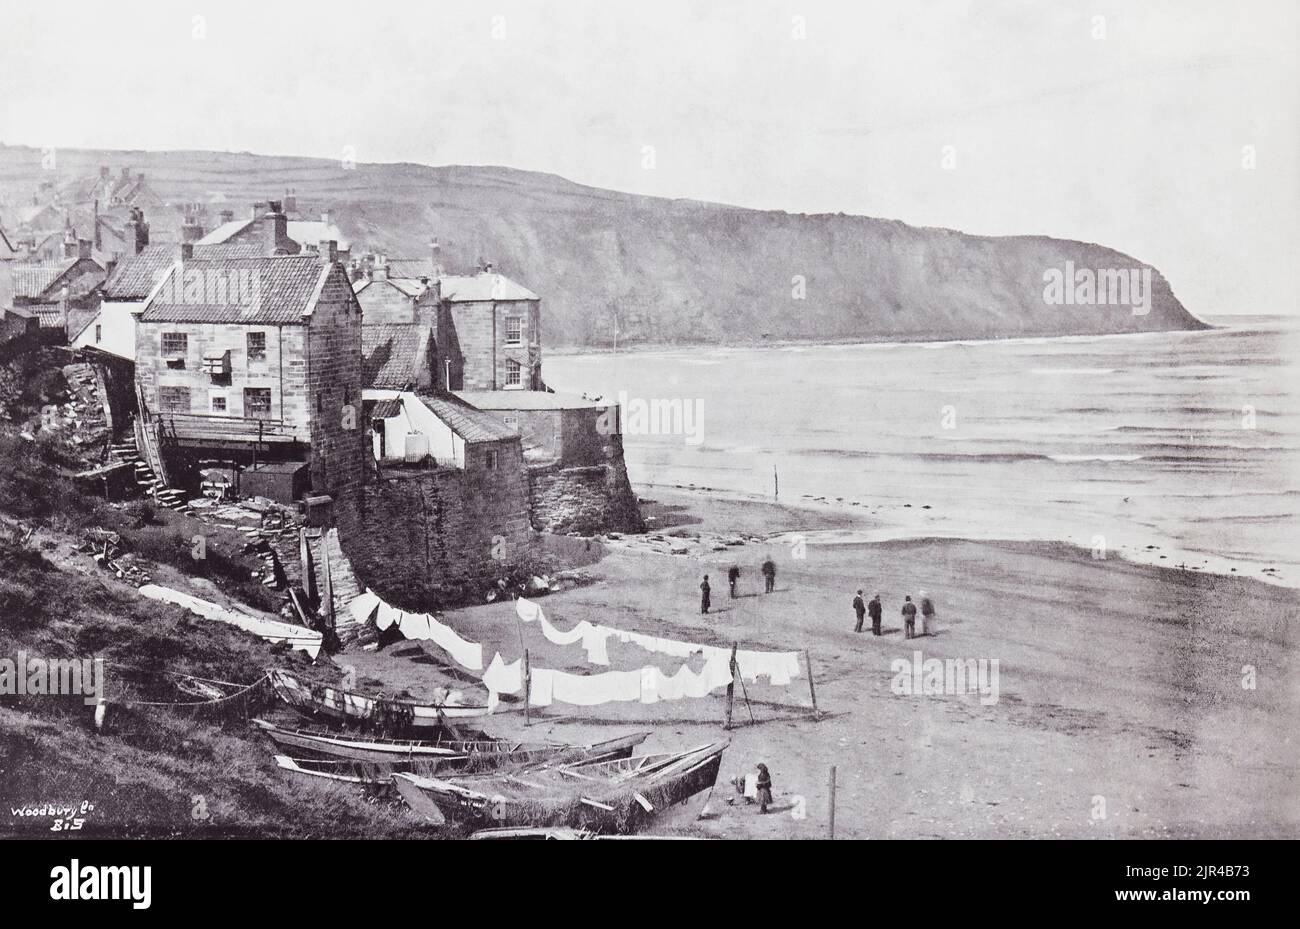 Robin Hood's Bay, North Yorkshire, England.  The village and bay, seen here in the 19th century. From Around The Coast,  An Album of Pictures from Photographs of the Chief Seaside Places of Interest in Great Britain and Ireland published London, 1895, by George Newnes Limited. Stock Photo